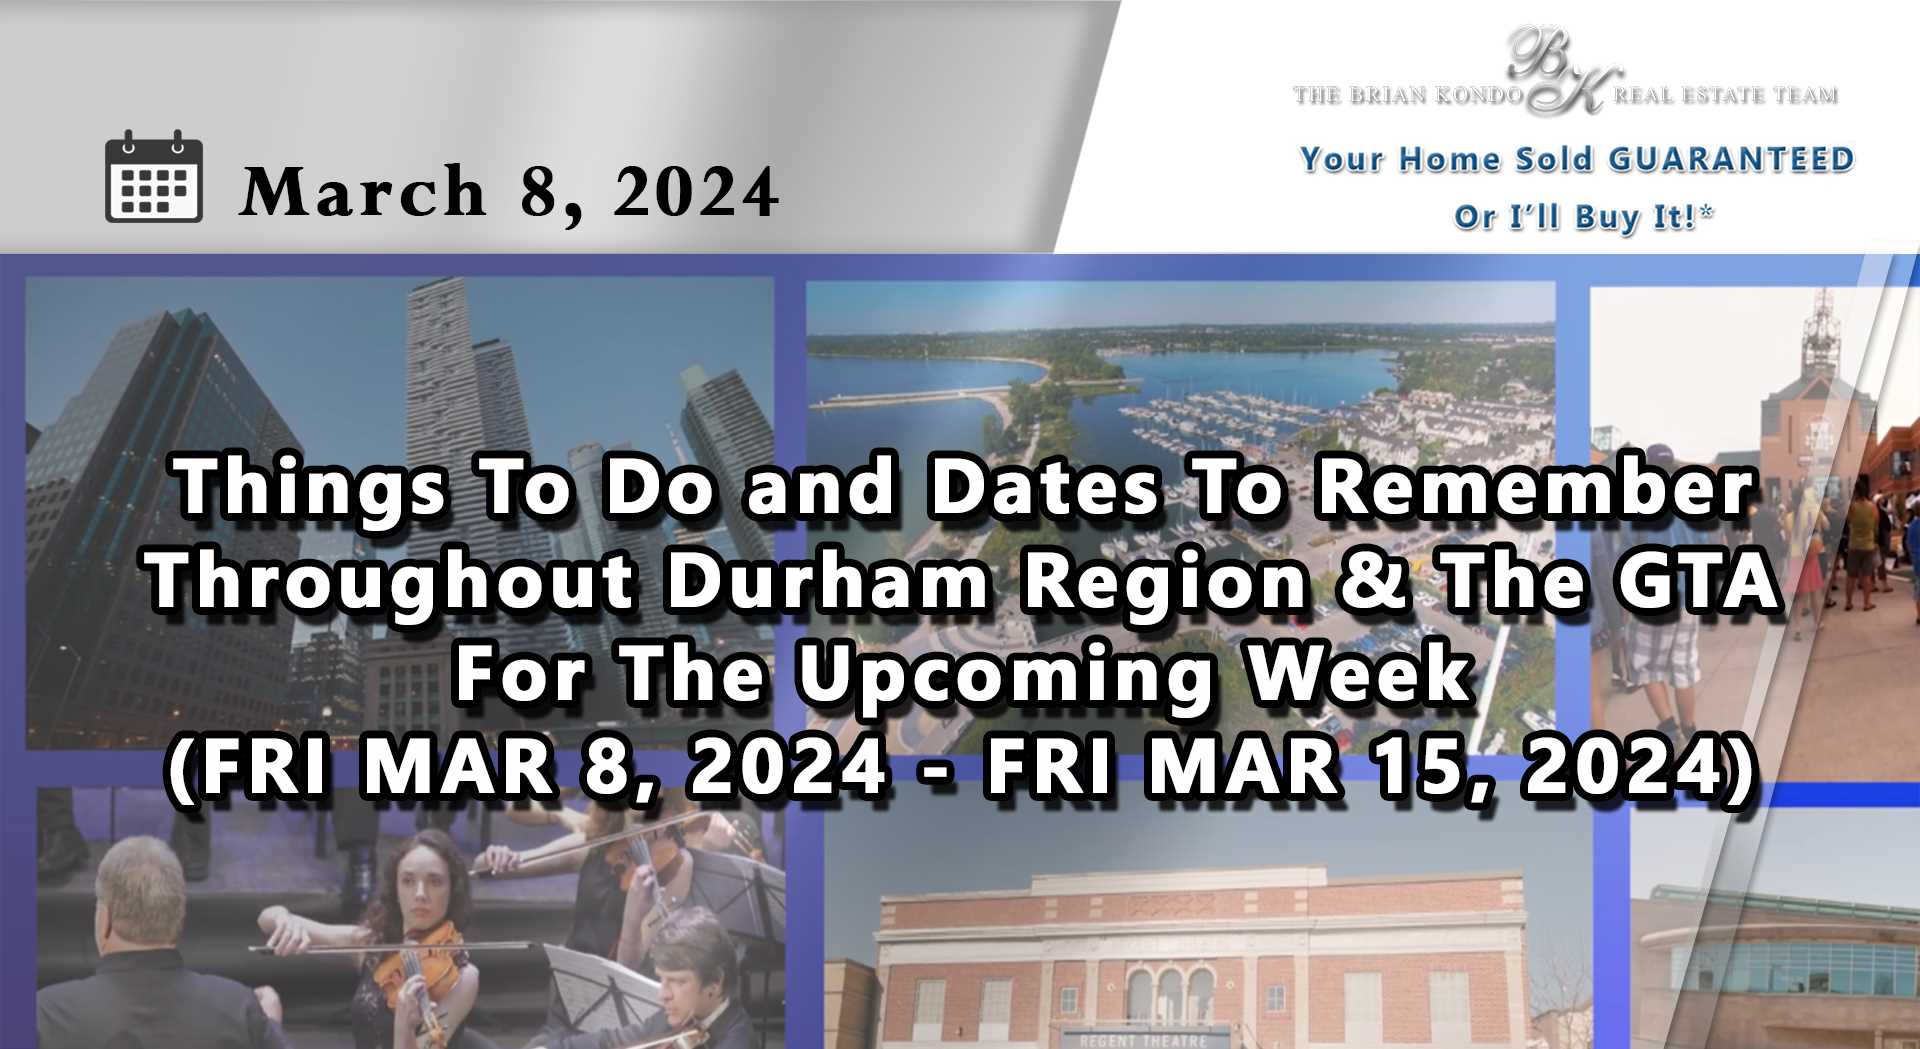 Things To Do and Dates To Remember Throughout Durham Region and The GTA For The Upcoming Week (FRI MAR 8, 2024 - FRI MAR 15, 2024)